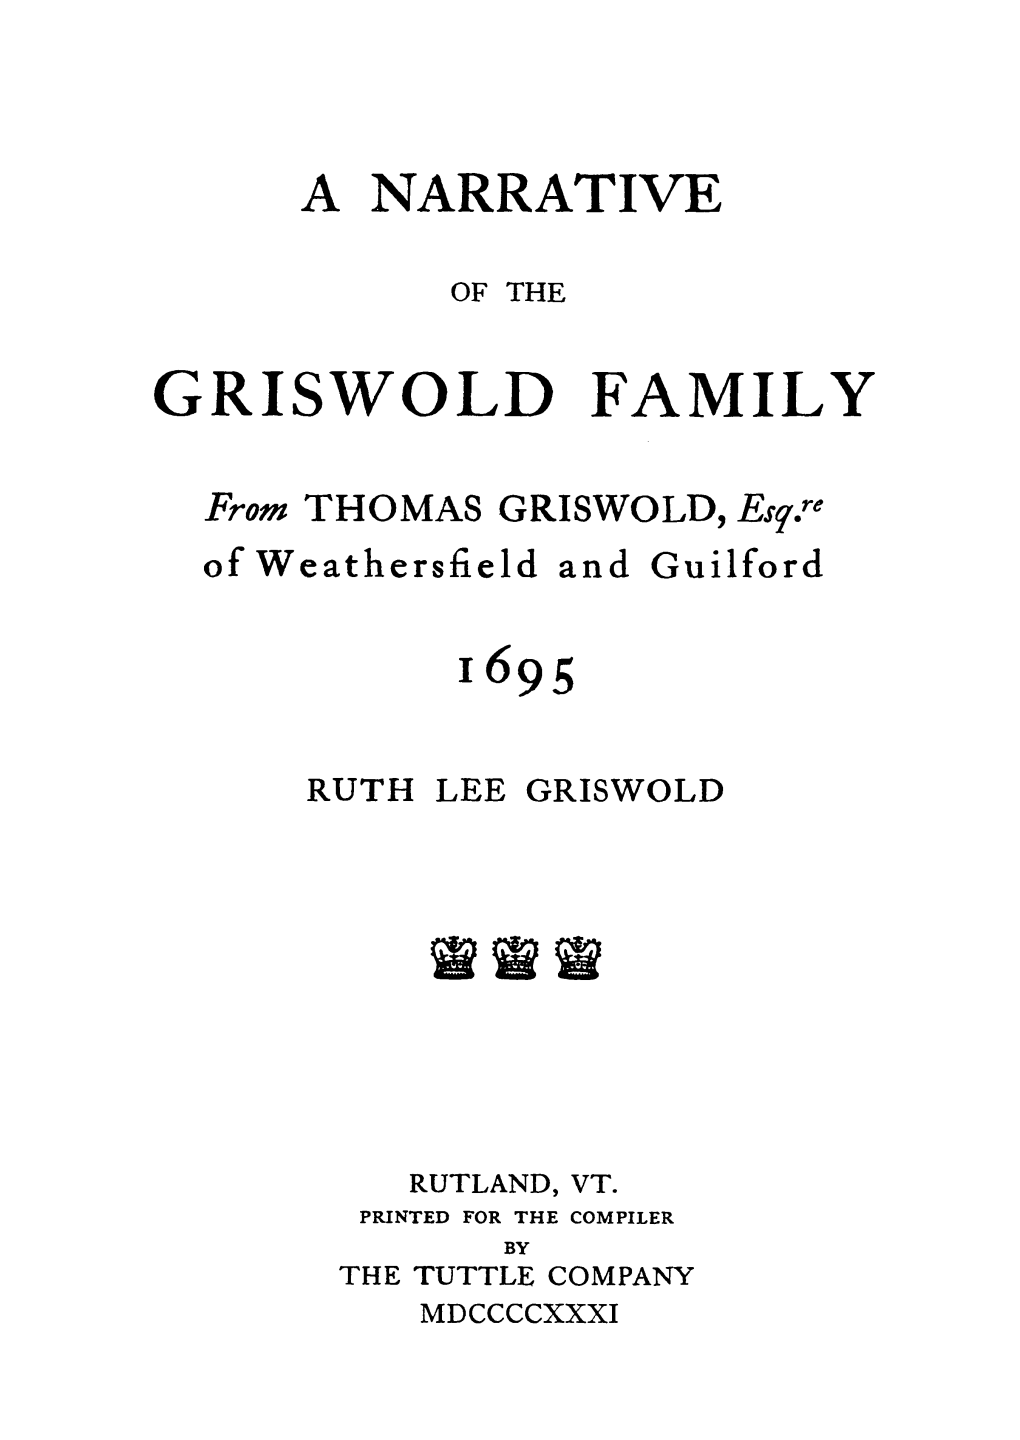 Griswold Family